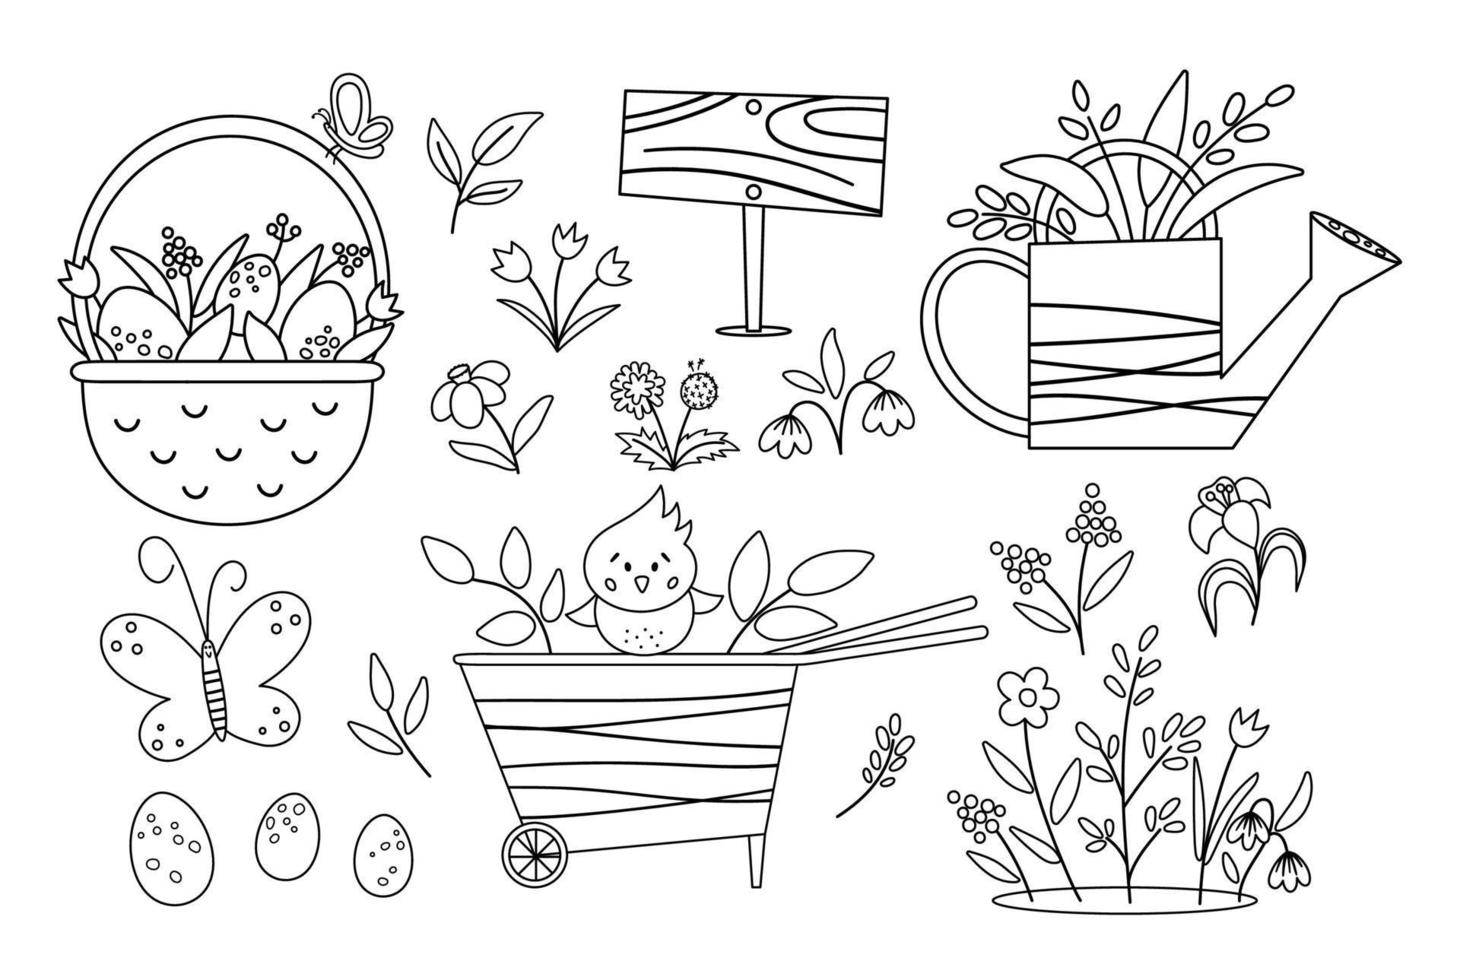 Vector cute black and white garden and Easter icons pack. Wheel barrow, watering can, eggs, first flowers and plants coloring page. Outline spring gardening tool illustration for kids.